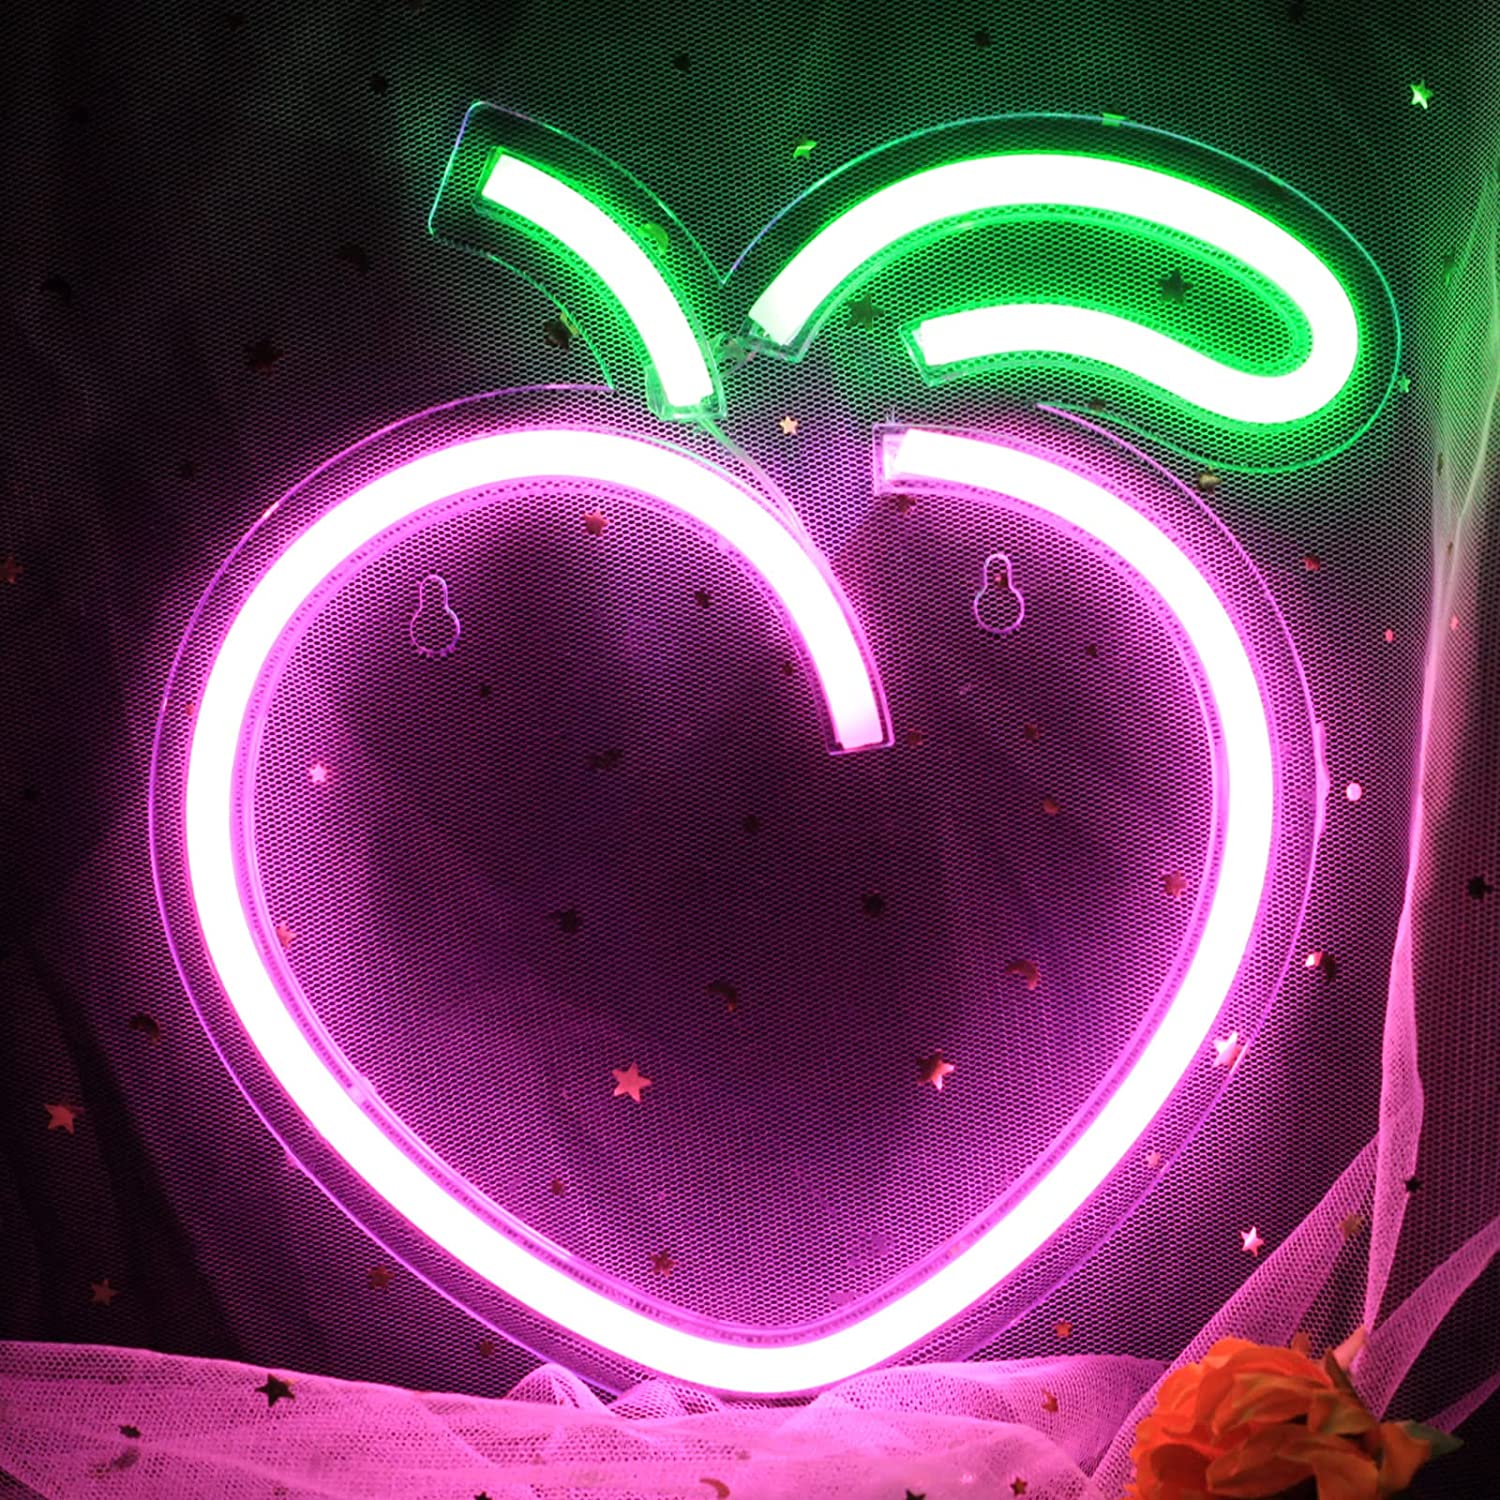 Buy IMEGINA Peach Neon Sign, Teen Bedroom Night Lights 8.9 x9.2 Inch, USB Powered Hot Pink Decor with Switch for Playroom Bar Hotel Party Game Kids Room, Valentine's Gift Online in Cote